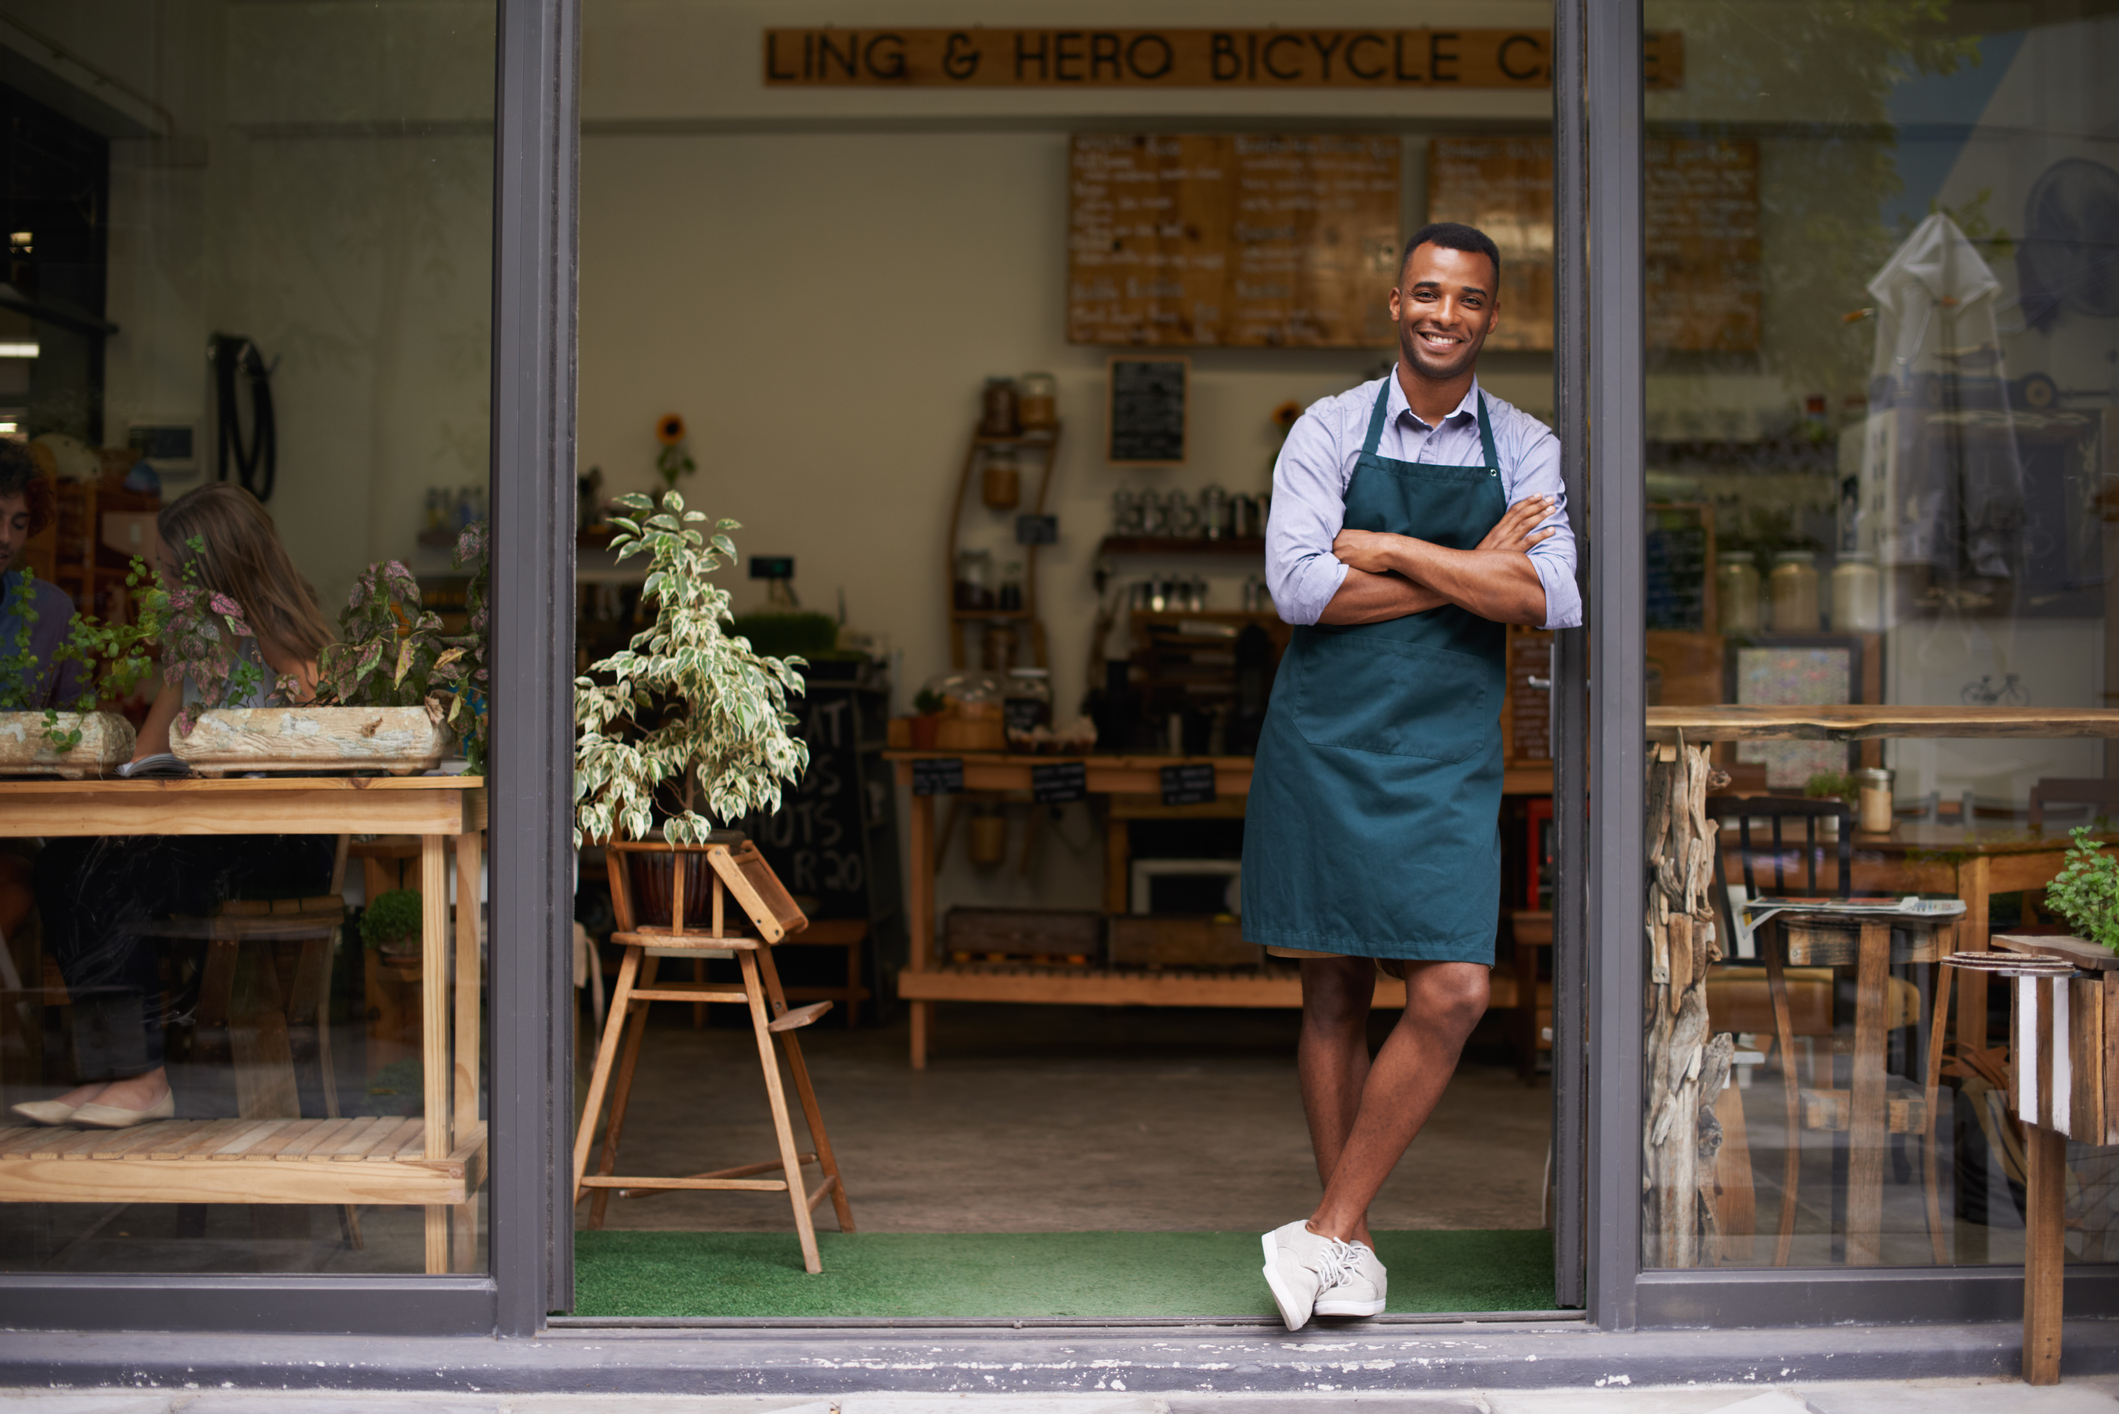 How to Prepare Your Small Business for Tax Season